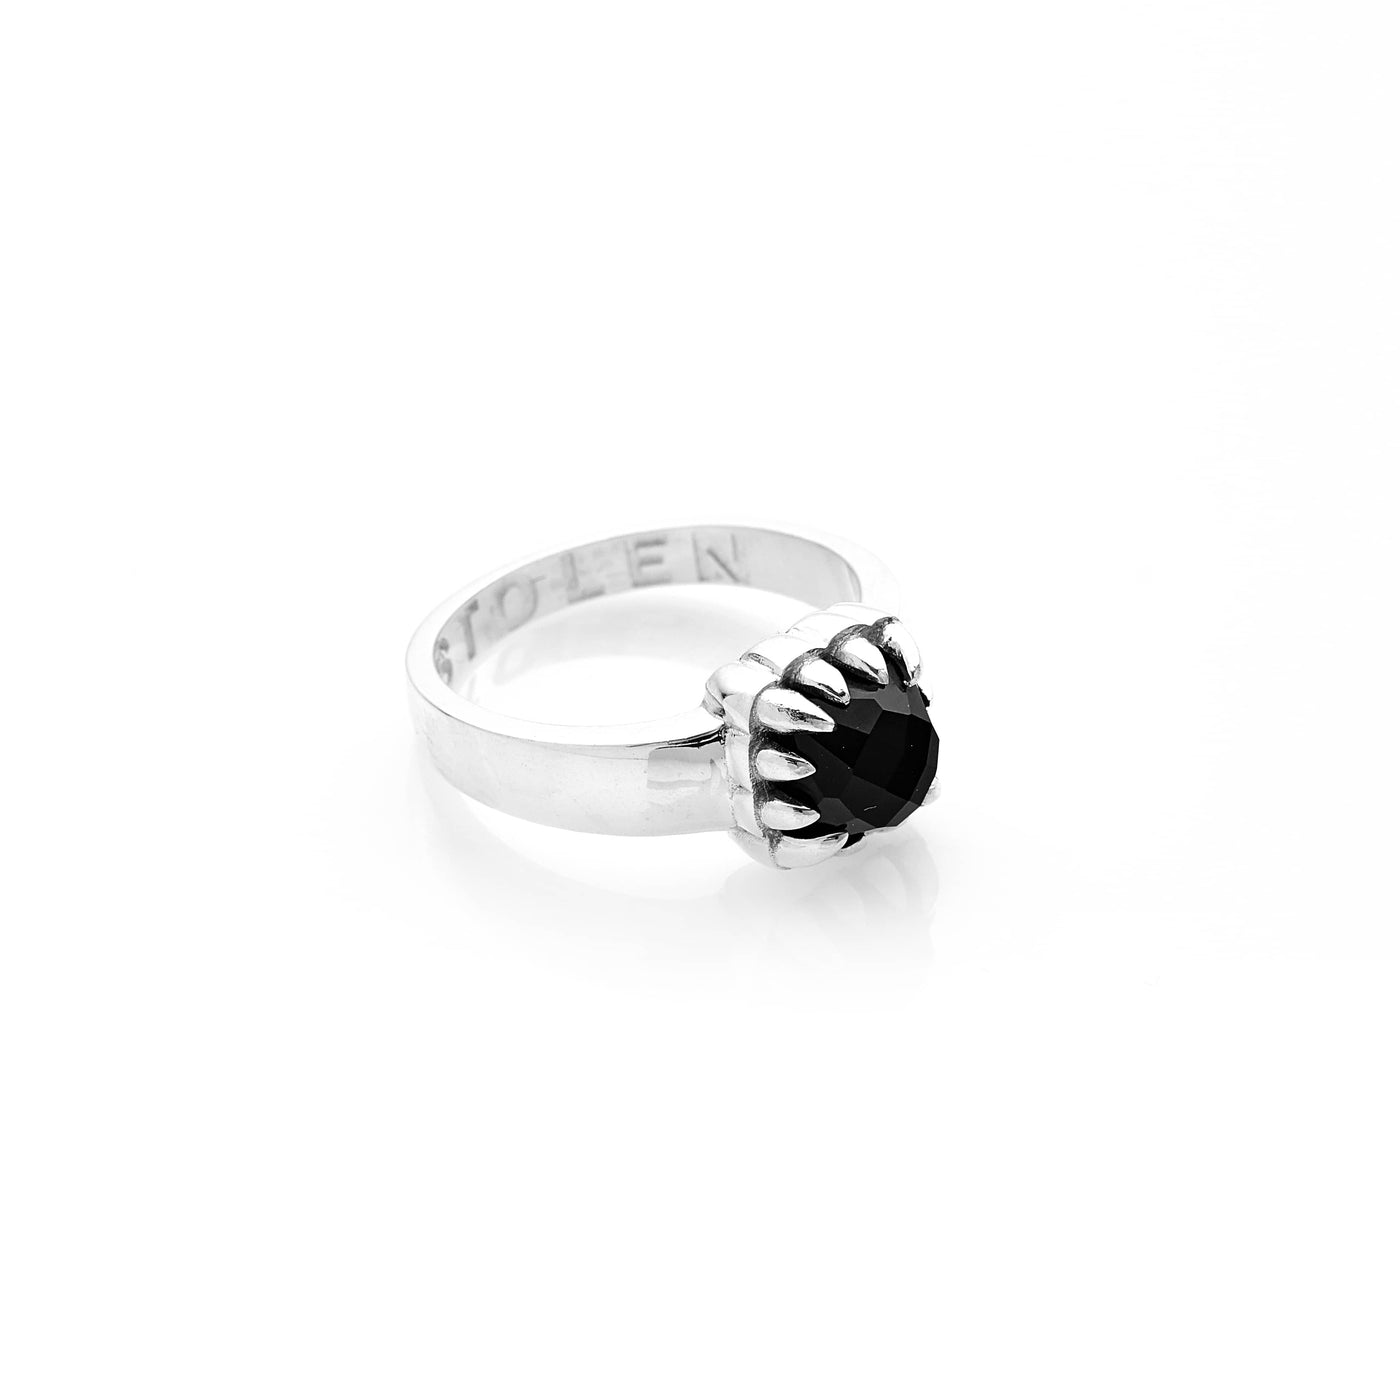 STOLEN GIRLFRIENDS CLUB BABY CLAW RING  The Stolen Girlfriends Club Baby Claw Ring is now available in Black Onyx, or Yellow Citrine. The Baby Claw Ring features a thick band, holding an Onyx, or Yellow Citrine heart charm, which is held in place by the silver claw. The Stolen Girlfriends Club Baby Claw Ring embodies simple sophistication at its finest. Team them back with any look for added style and edge. 